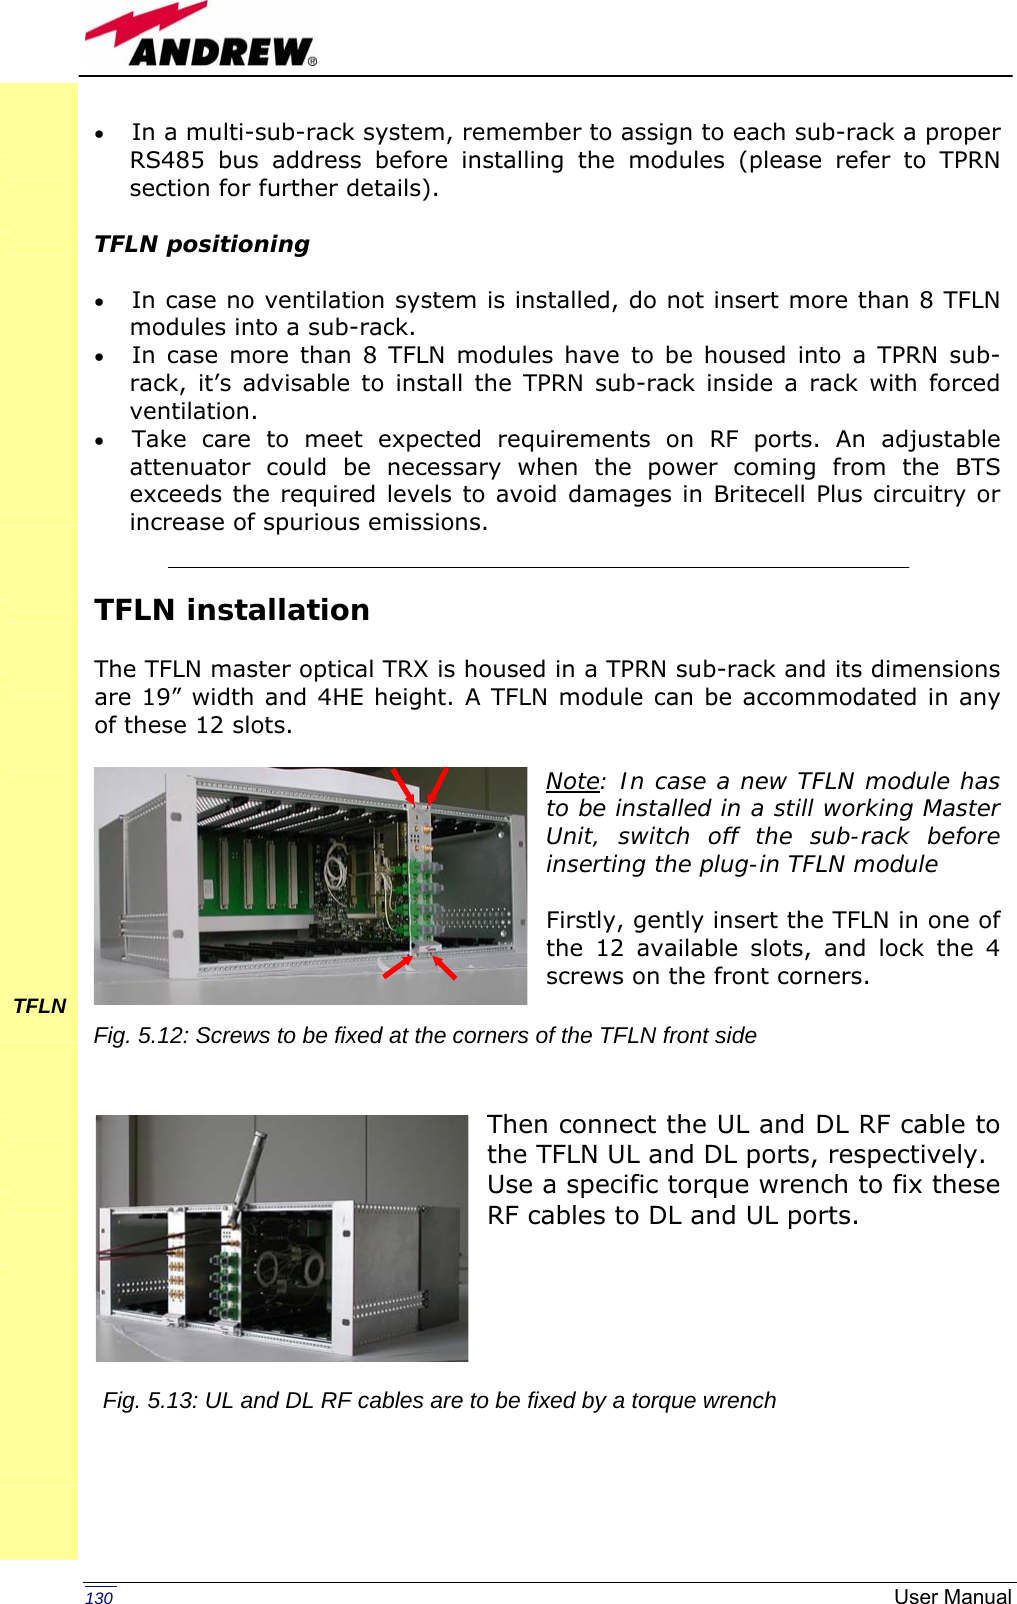   130  User Manual• In a multi-sub-rack system, remember to assign to each sub-rack a proper RS485 bus address before installing the modules (please refer to TPRN section for further details).  TFLN positioning  • In case no ventilation system is installed, do not insert more than 8 TFLN modules into a sub-rack.  • In case more than 8 TFLN modules have to be housed into a TPRN sub-rack, it’s advisable to install the TPRN sub-rack inside a rack with forced ventilation. • Take care to meet expected requirements on RF ports. An adjustable attenuator could be necessary when the power coming from the BTS exceeds the required levels to avoid damages in Britecell Plus circuitry or increase of spurious emissions.   TFLN installation  The TFLN master optical TRX is housed in a TPRN sub-rack and its dimensions are 19” width and 4HE height. A TFLN module can be accommodated in any of these 12 slots.  Note: In case a new TFLN module has to be installed in a still working Master Unit, switch off the sub-rack before inserting the plug-in TFLN module  Firstly, gently insert the TFLN in one of the 12 available slots, and lock the 4 screws on the front corners.     Then connect the UL and DL RF cable to the TFLN UL and DL ports, respectively.  Use a specific torque wrench to fix these RF cables to DL and UL ports.                   TFLN        Fig. 5.12: Screws to be fixed at the corners of the TFLN front sideFig. 5.13: UL and DL RF cables are to be fixed by a torque wrench 